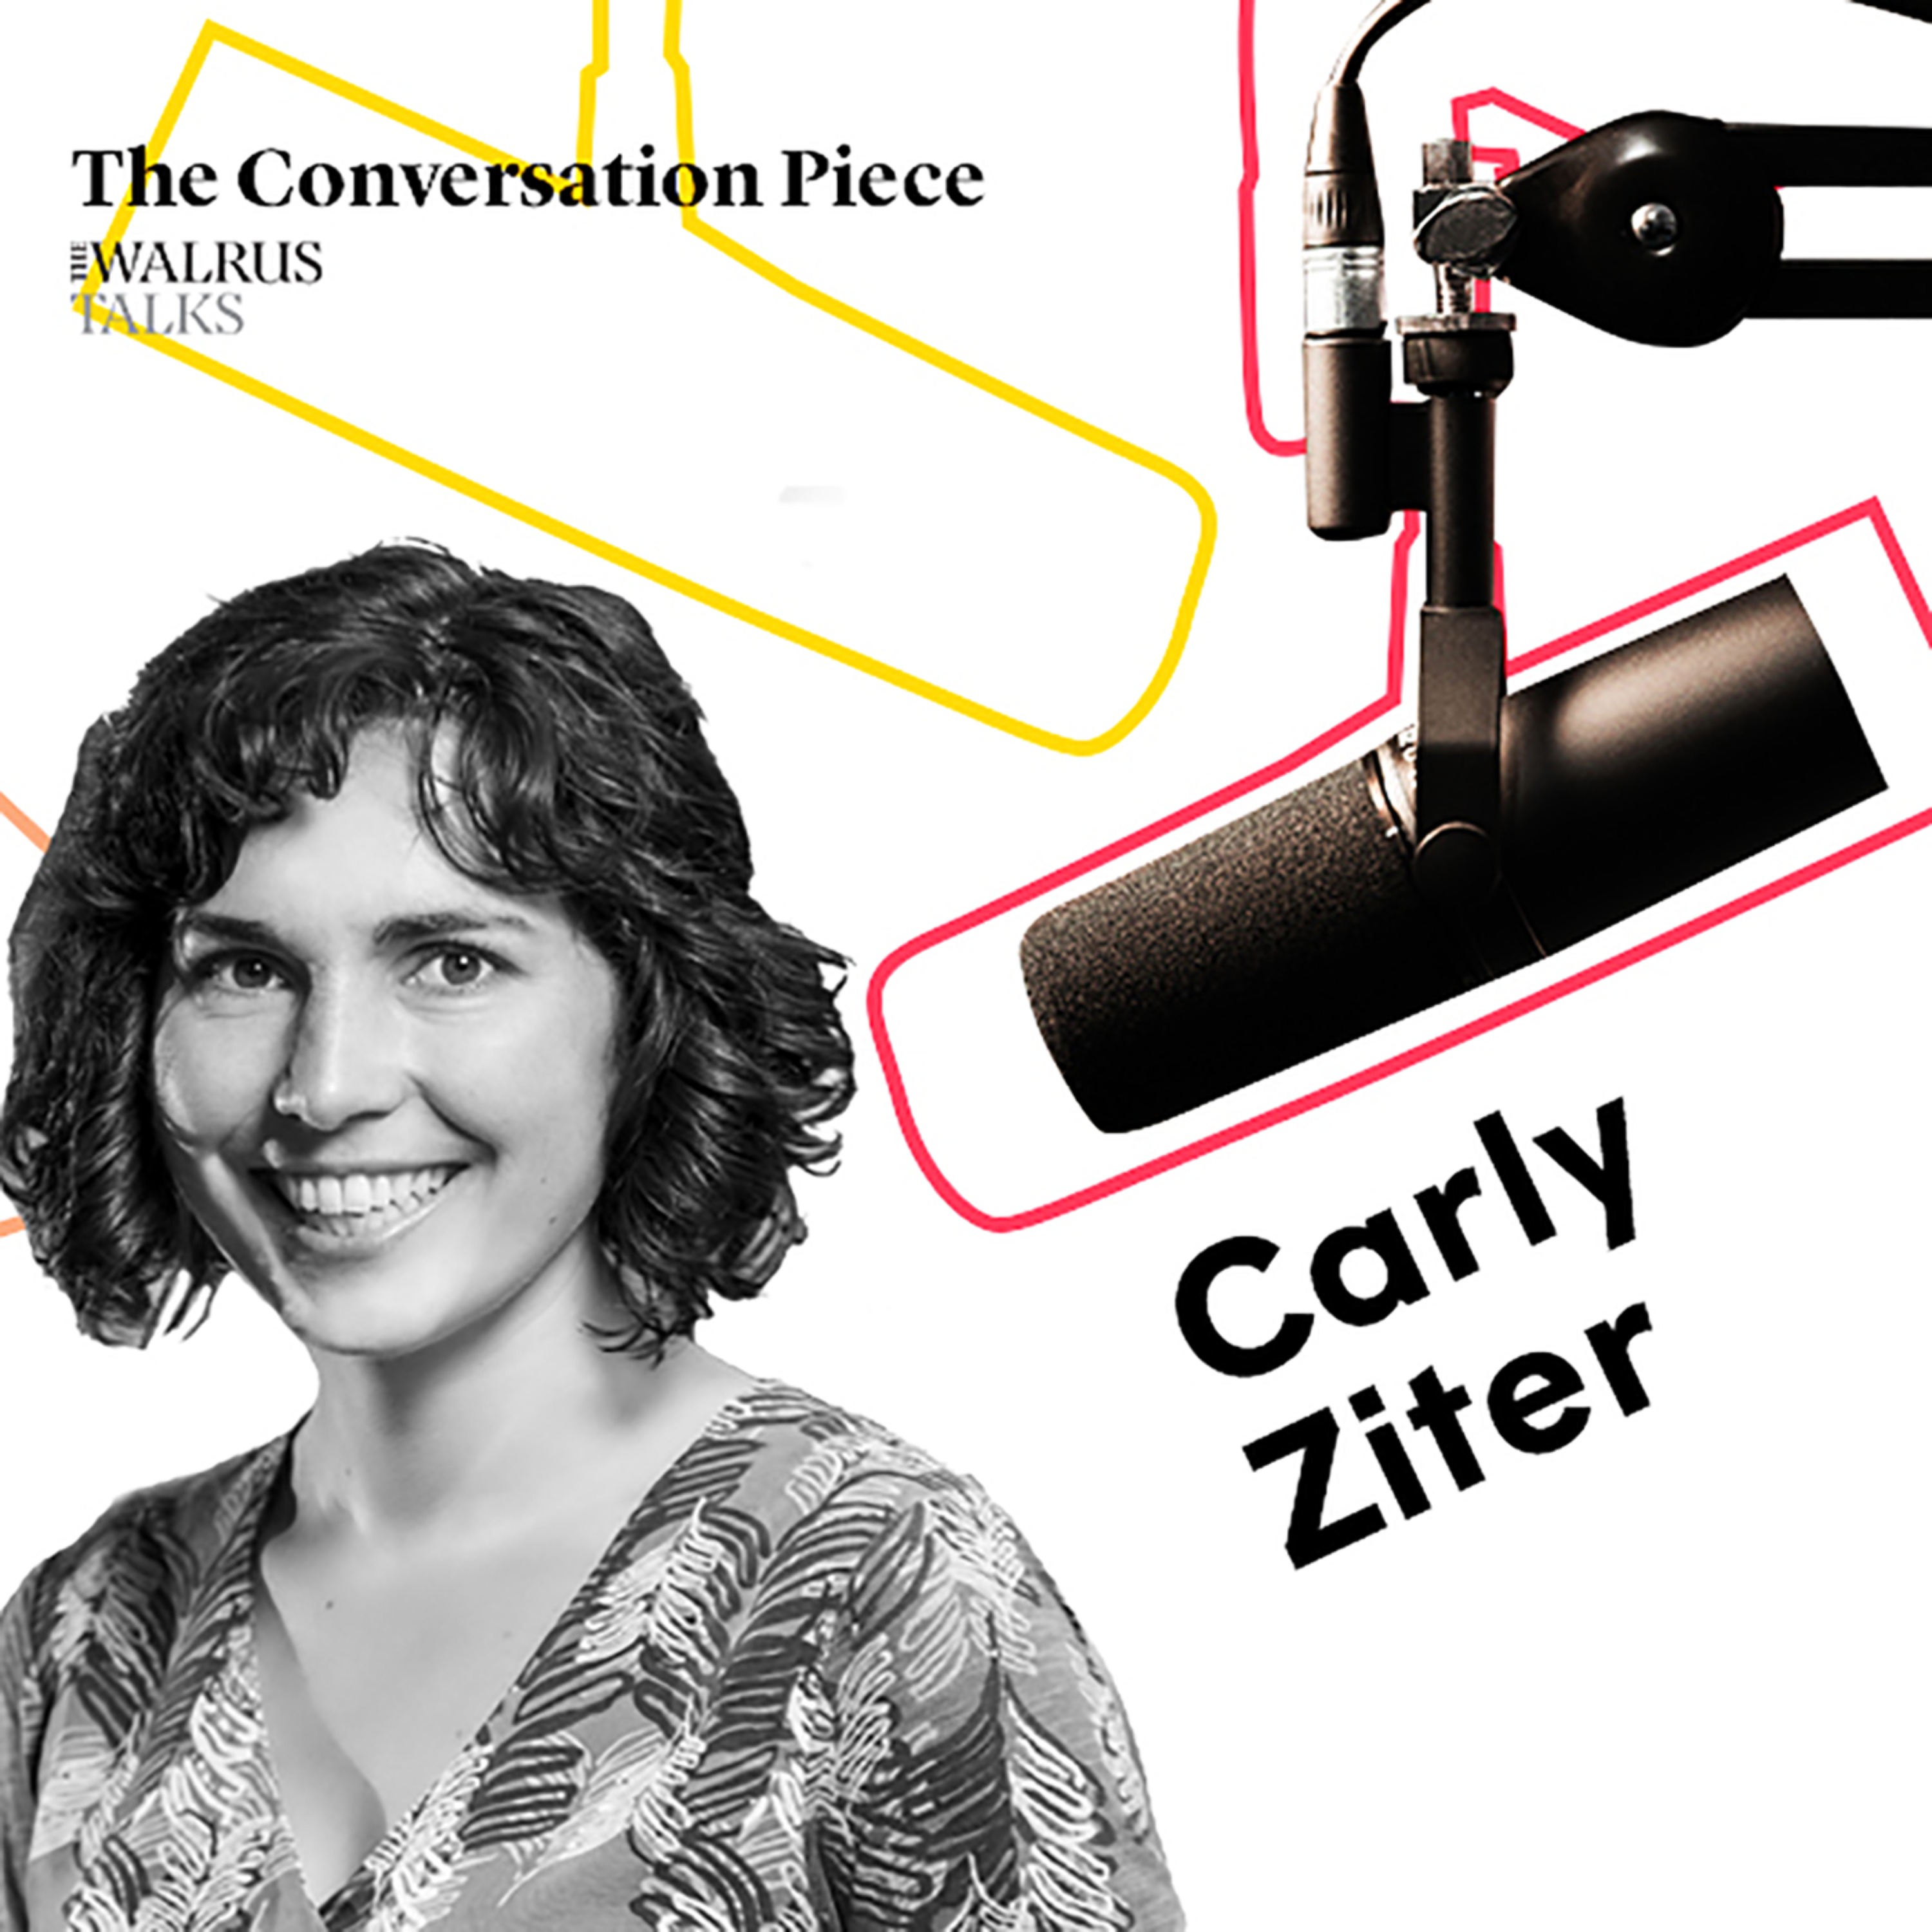 Carly Ziter: The Ecosystems in Our Cities